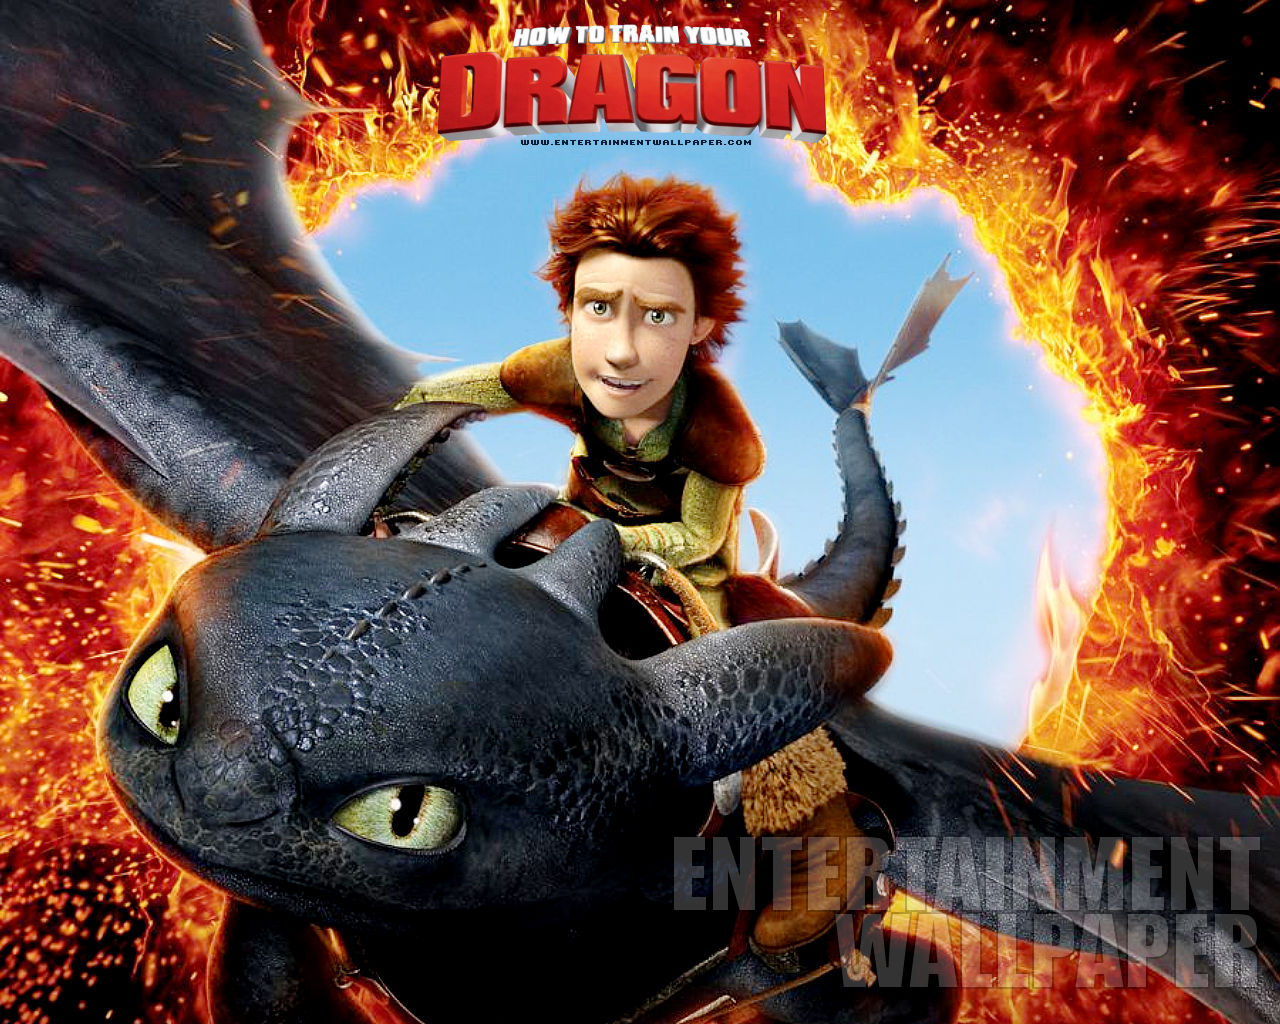 How to train your dragon! - How to Train Your Dragon Wallpaper (25391780) -  Fanpop